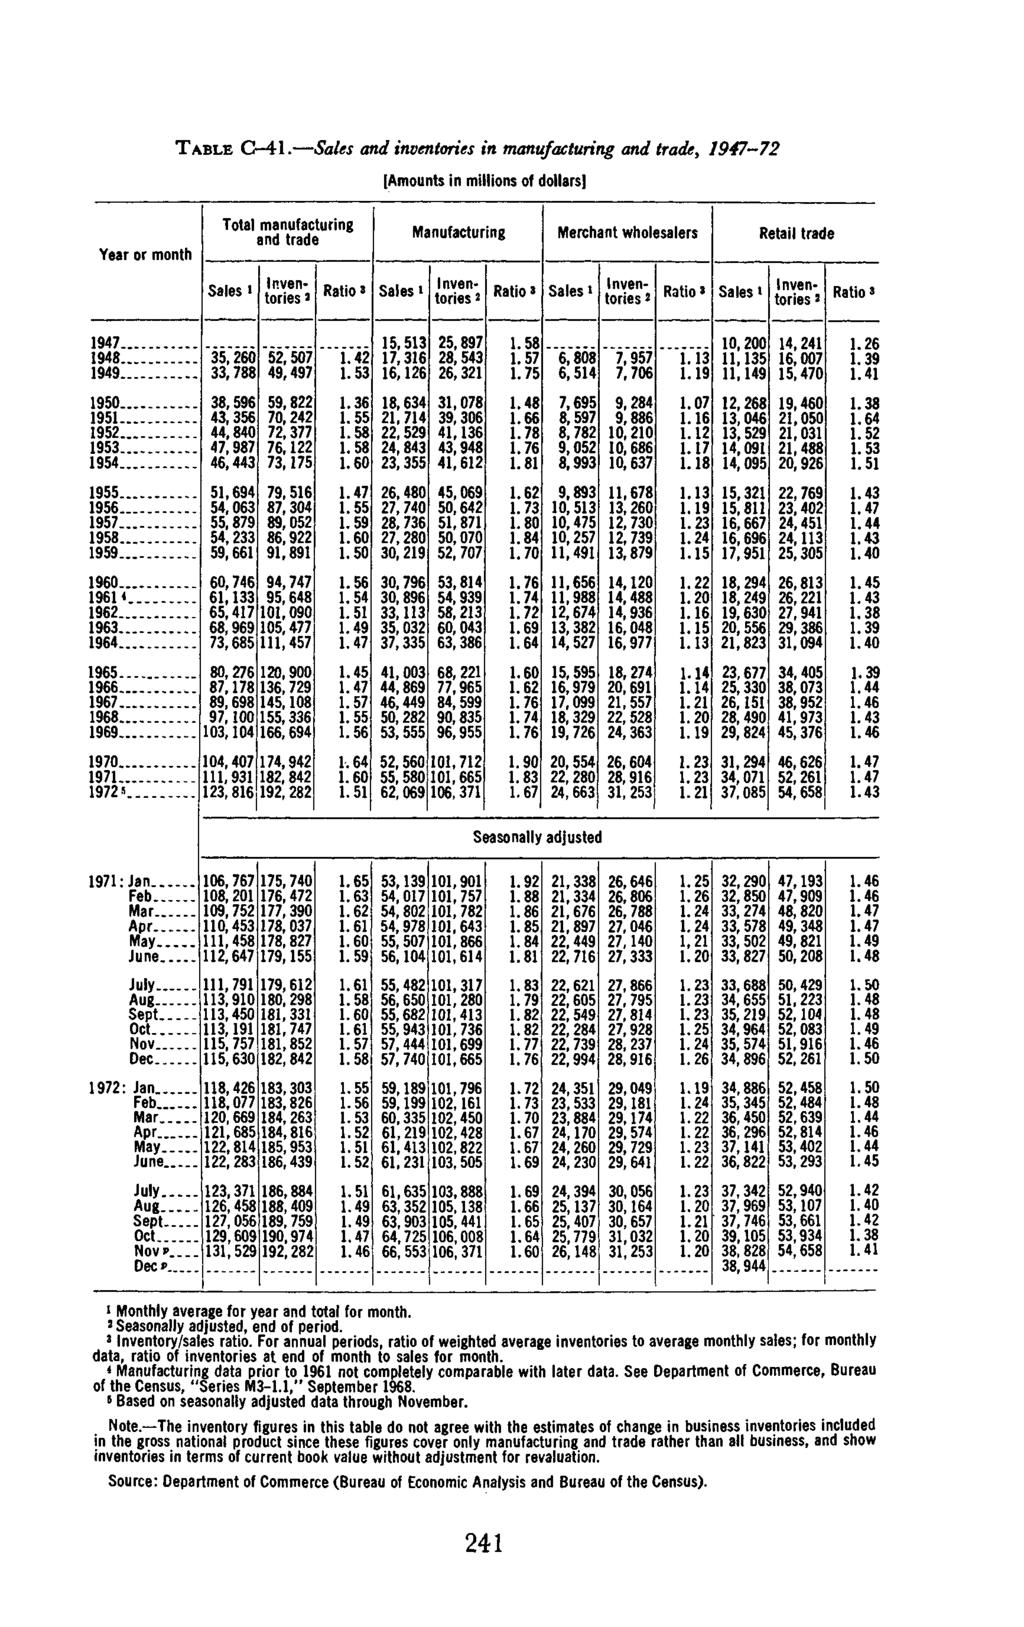 1973 TABLE C-41. and inventories in manufacturing ; 1947-7 Ratios 35,60 5,507 1.4 16,16 5,897 8,543 6,31 58 57 75 10, 00 14,41 1.6 1950